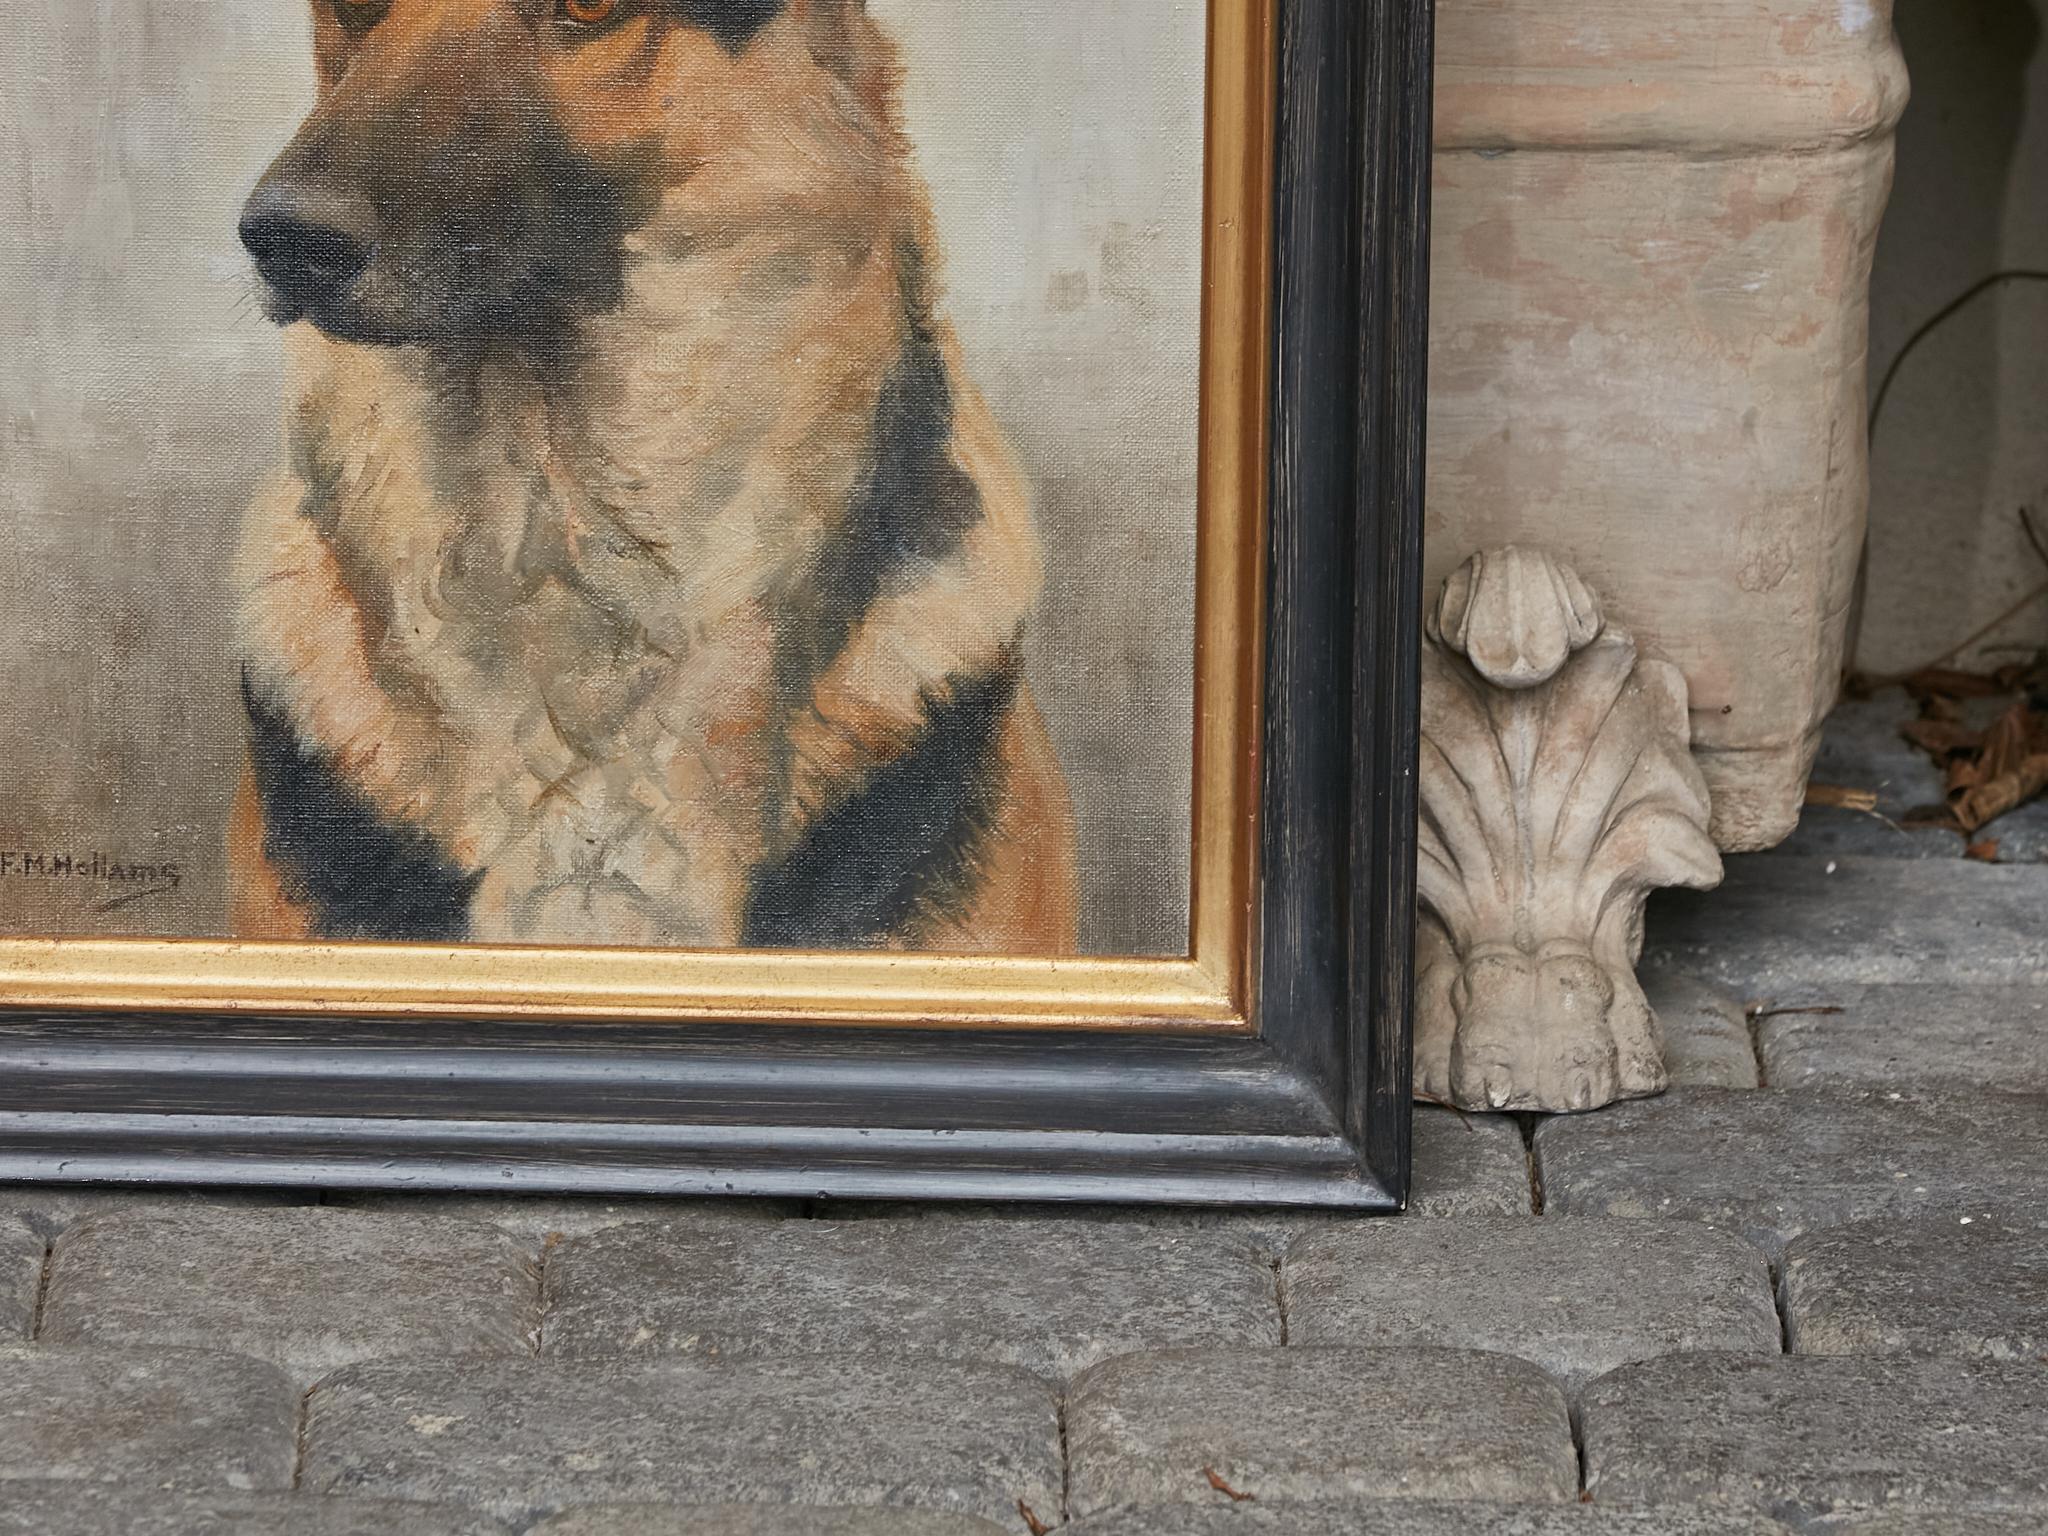 20th Century German Shepherd Painting Signed F.M Hollams, circa 1910 in Black and Gold Frame